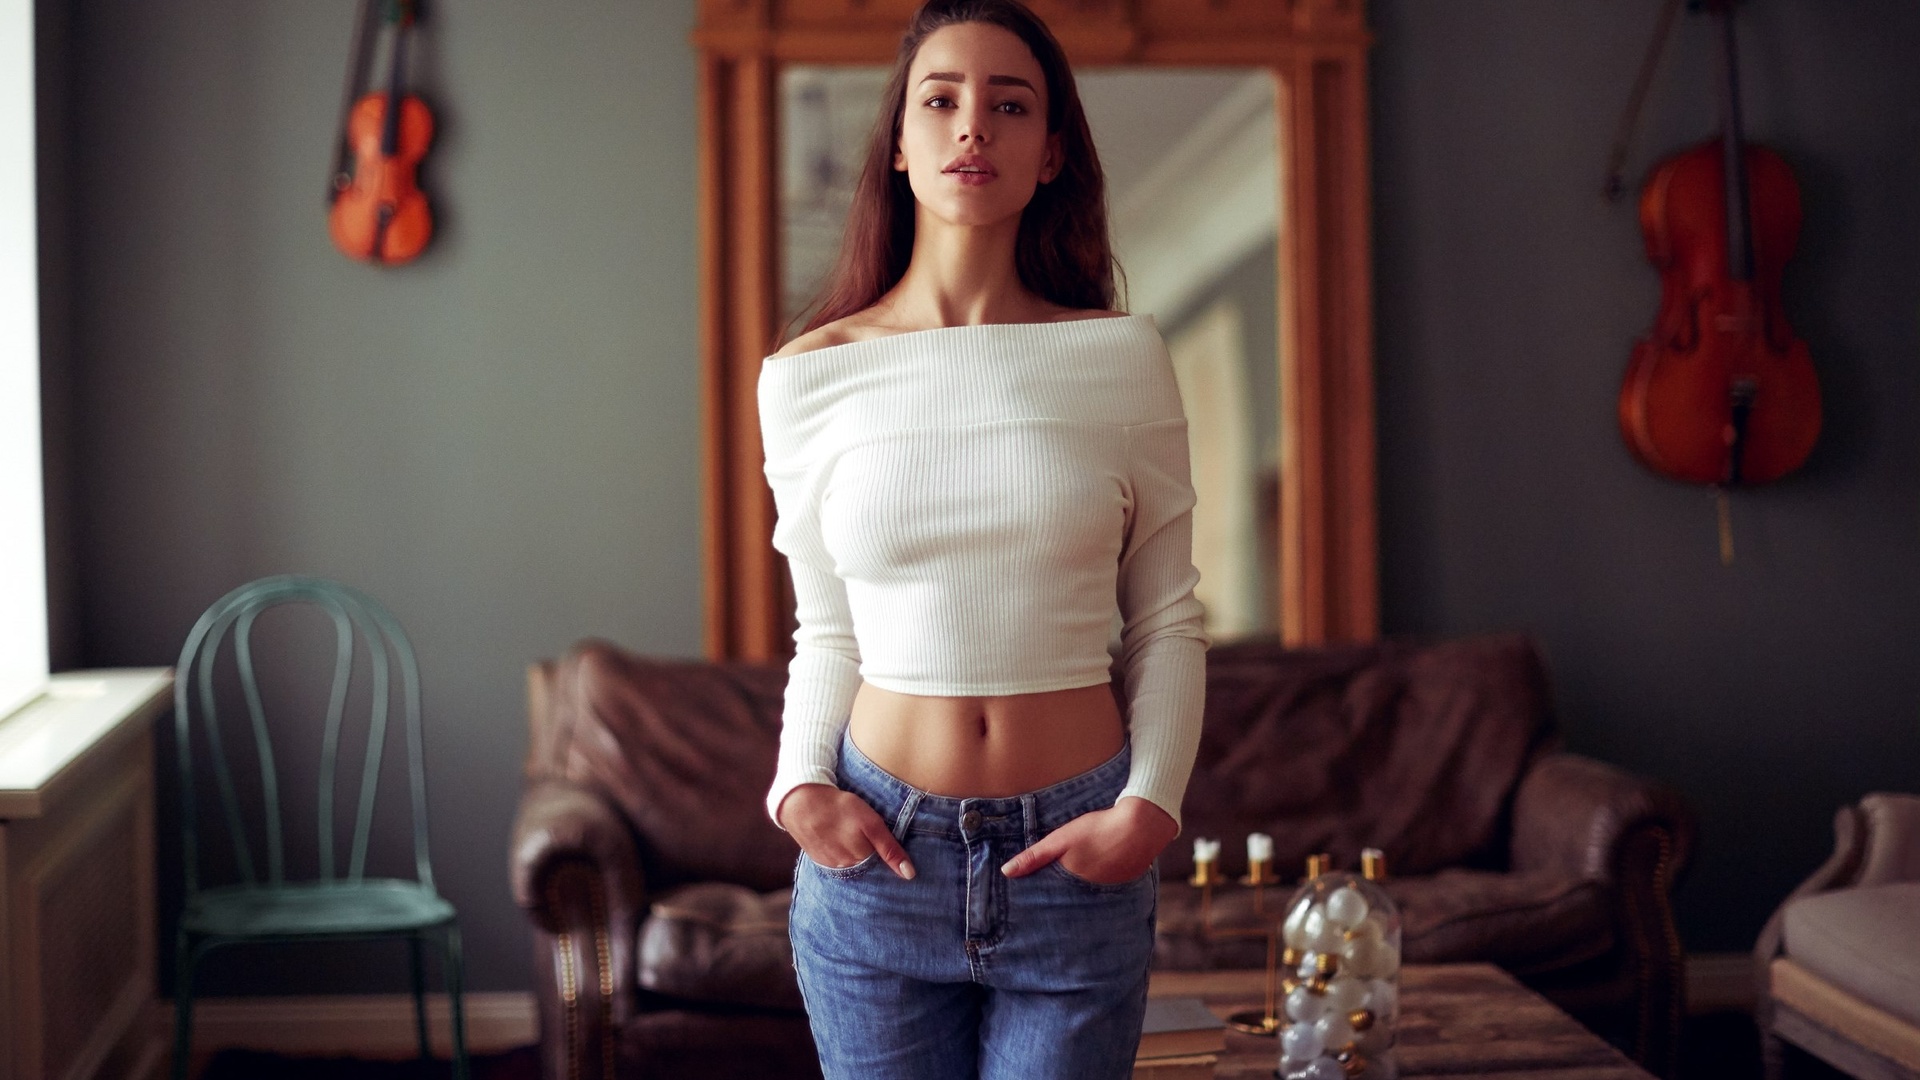 People 1920x1080 women model brunette long hair women indoors jeans short tops violin hands in pockets belly couch chair table bare shoulders blue pants blue  jeans